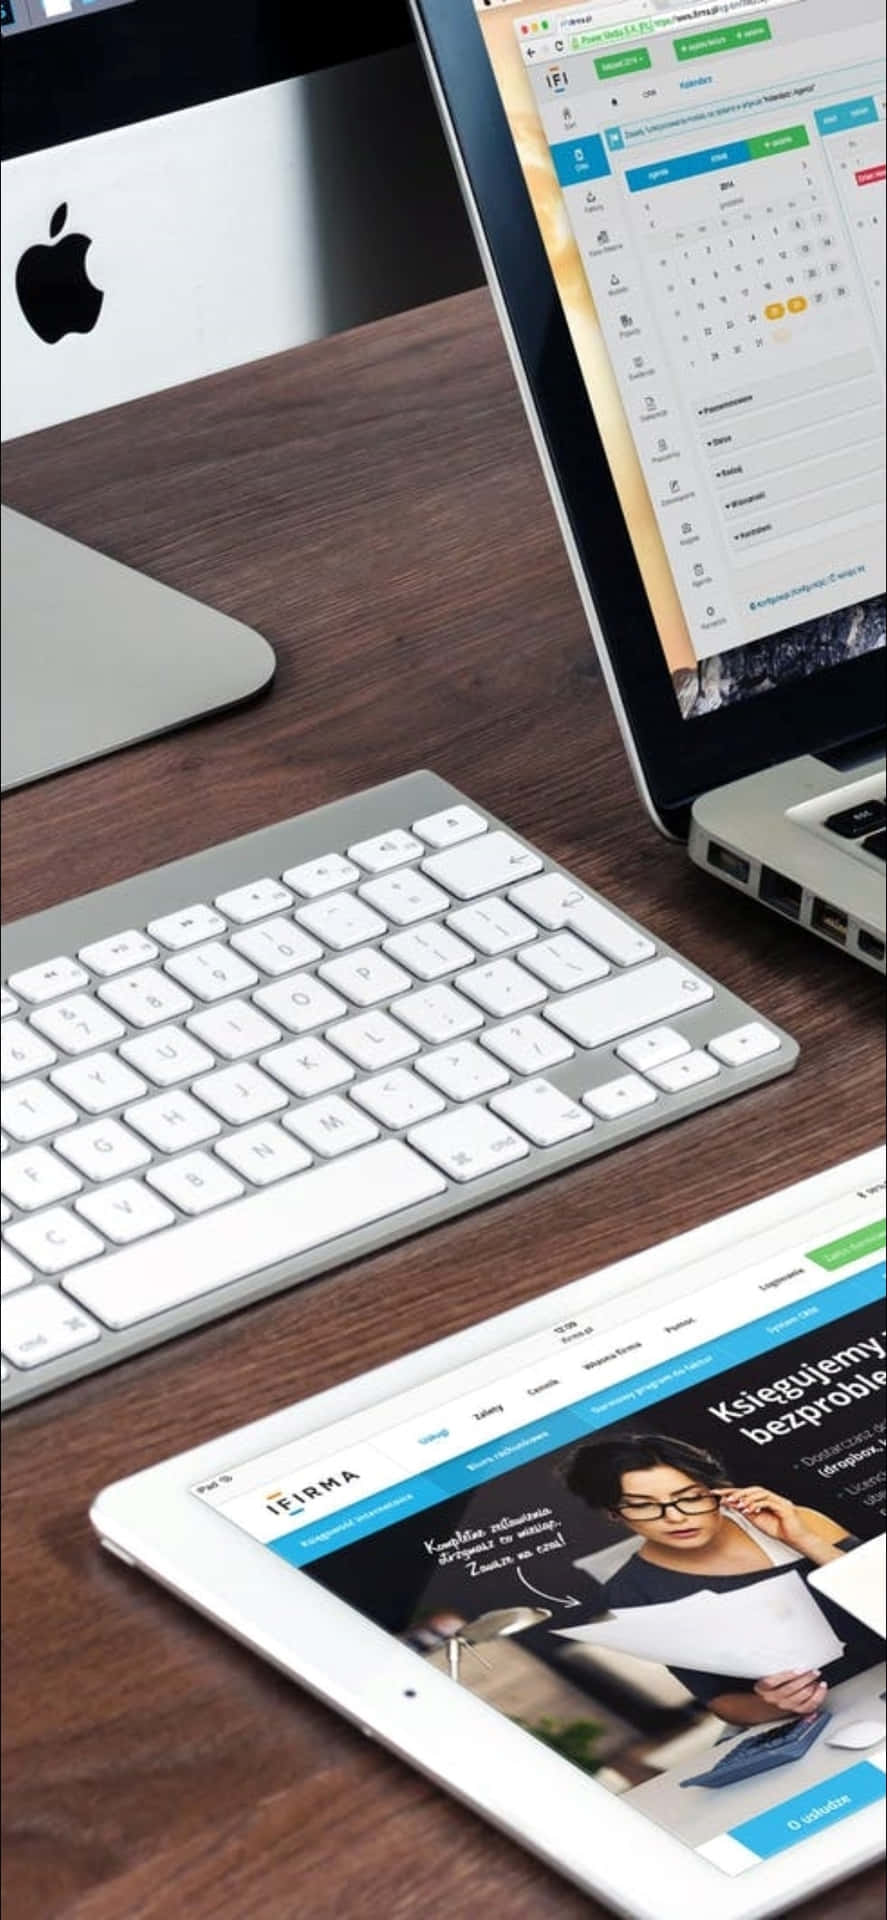 Iphone X Desk Background Laptop And A Keyboard